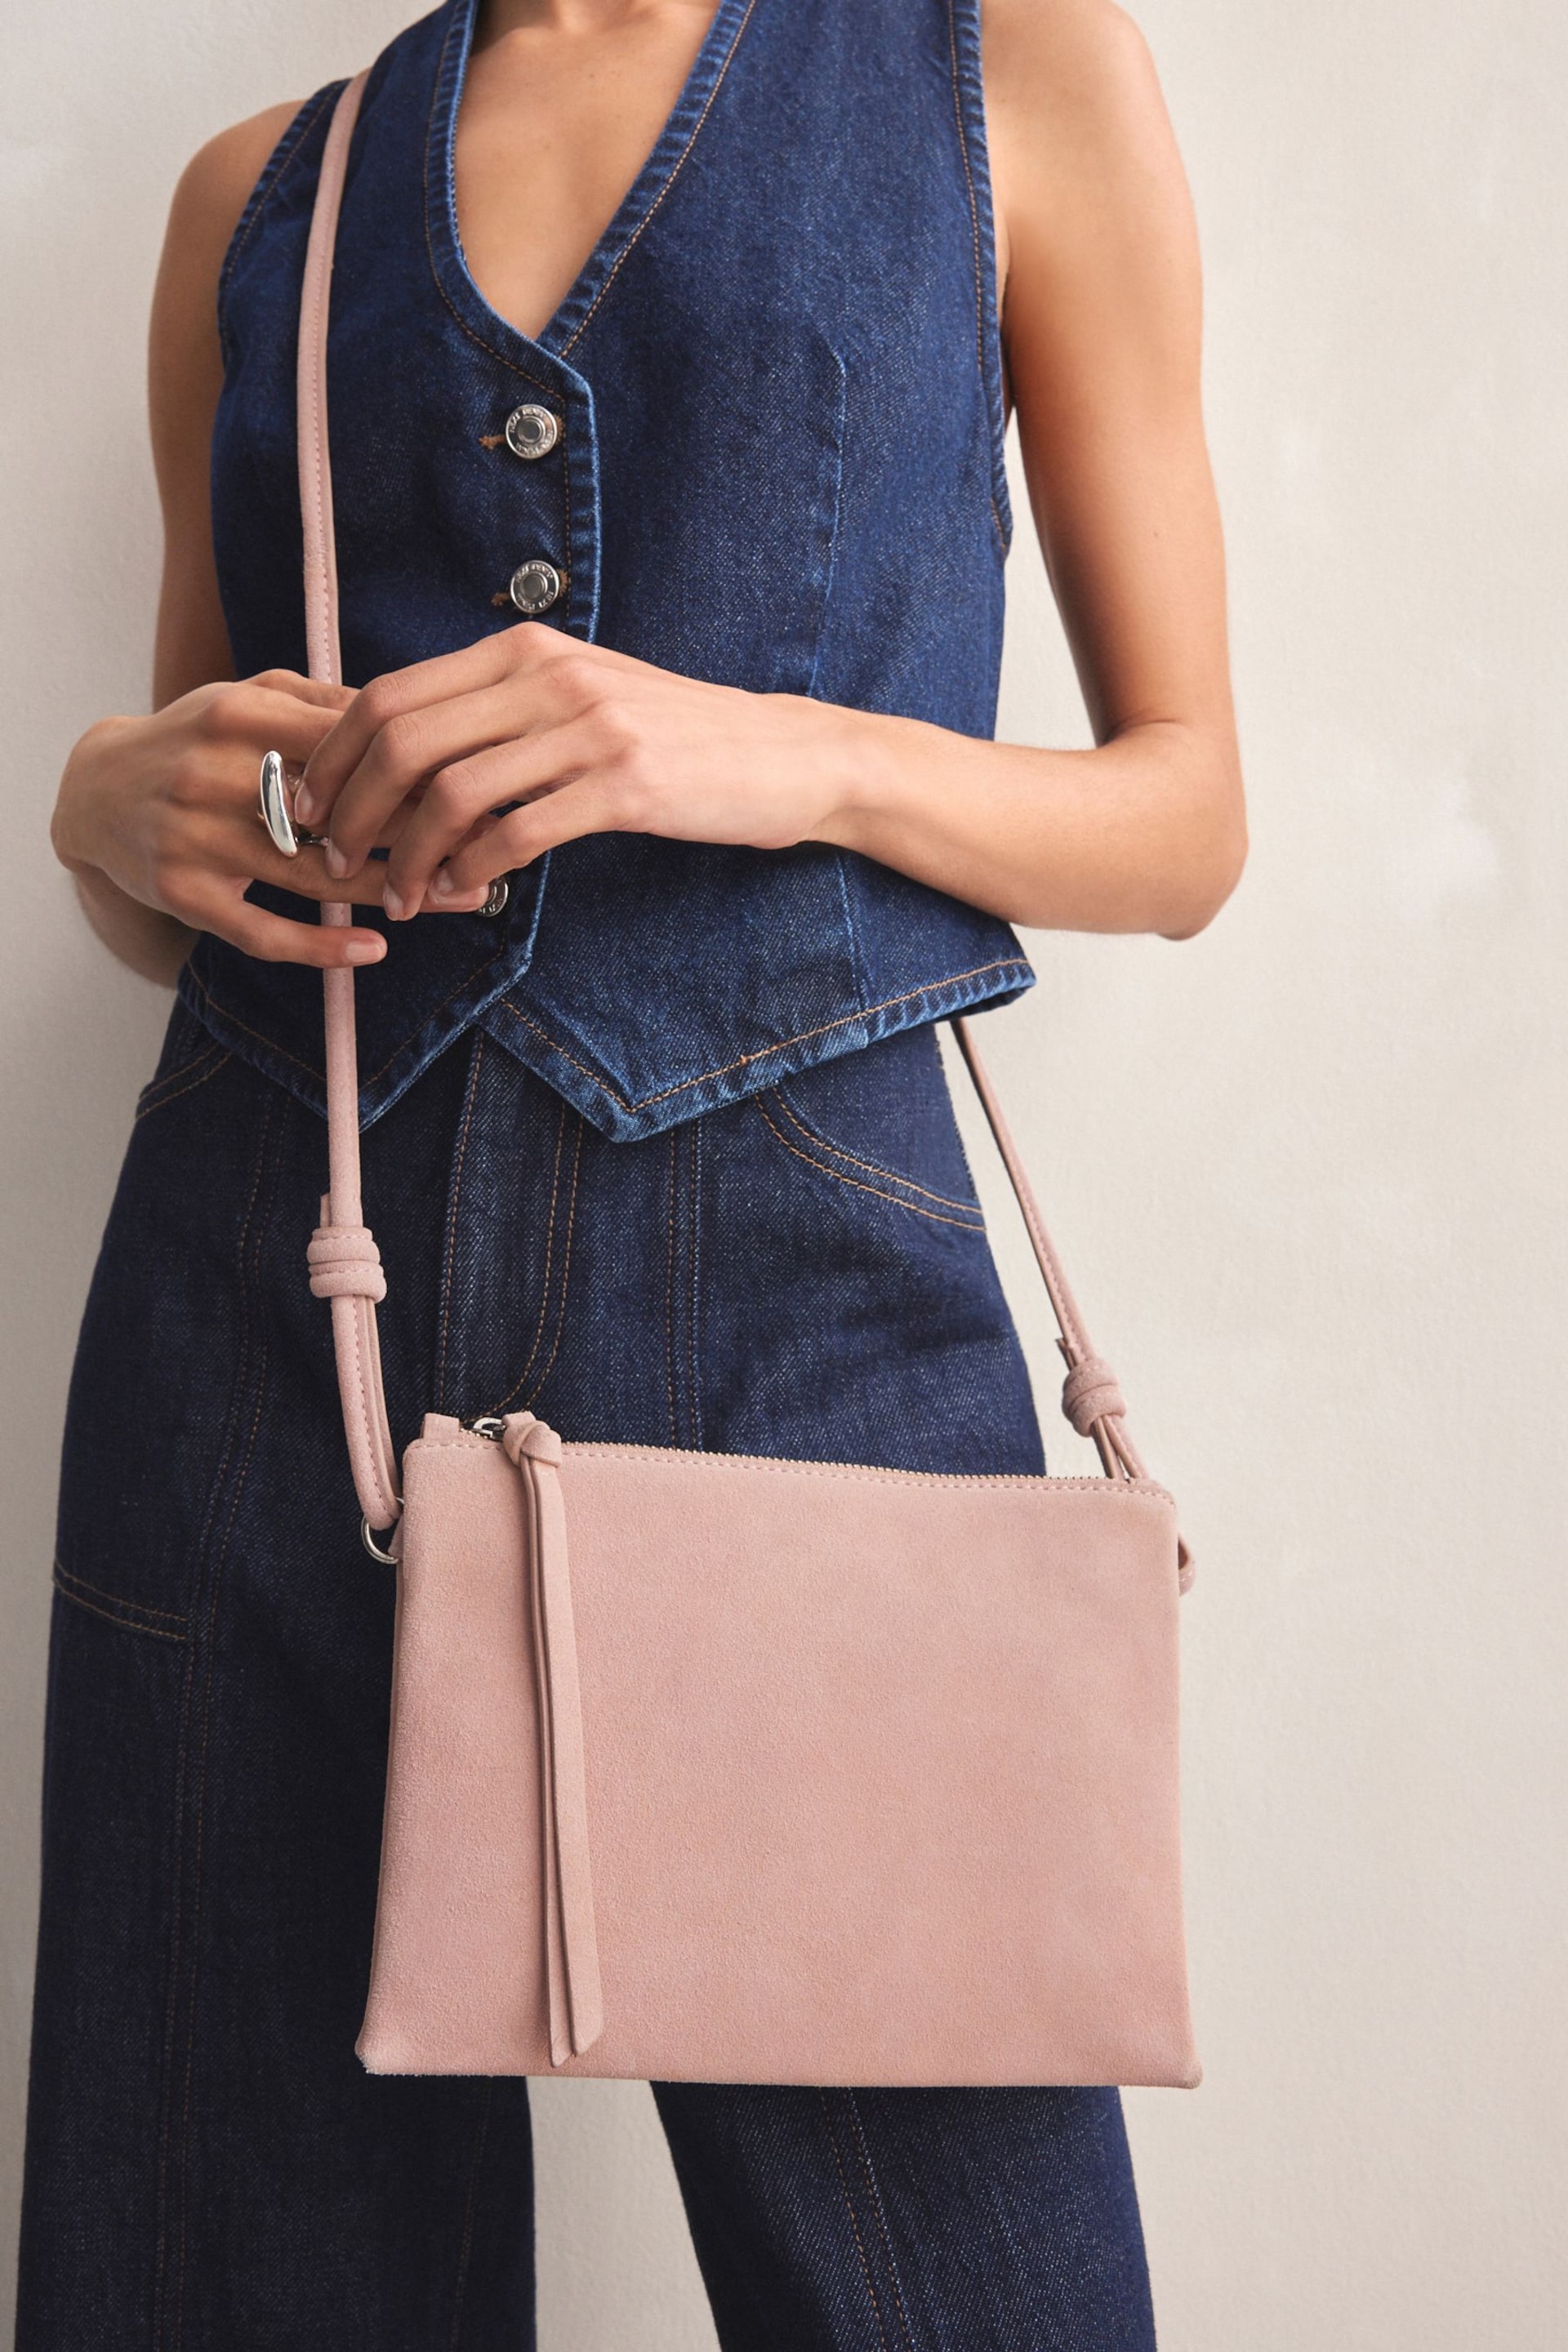 Pink Leather Cross-Body Bag - Image 3 of 6